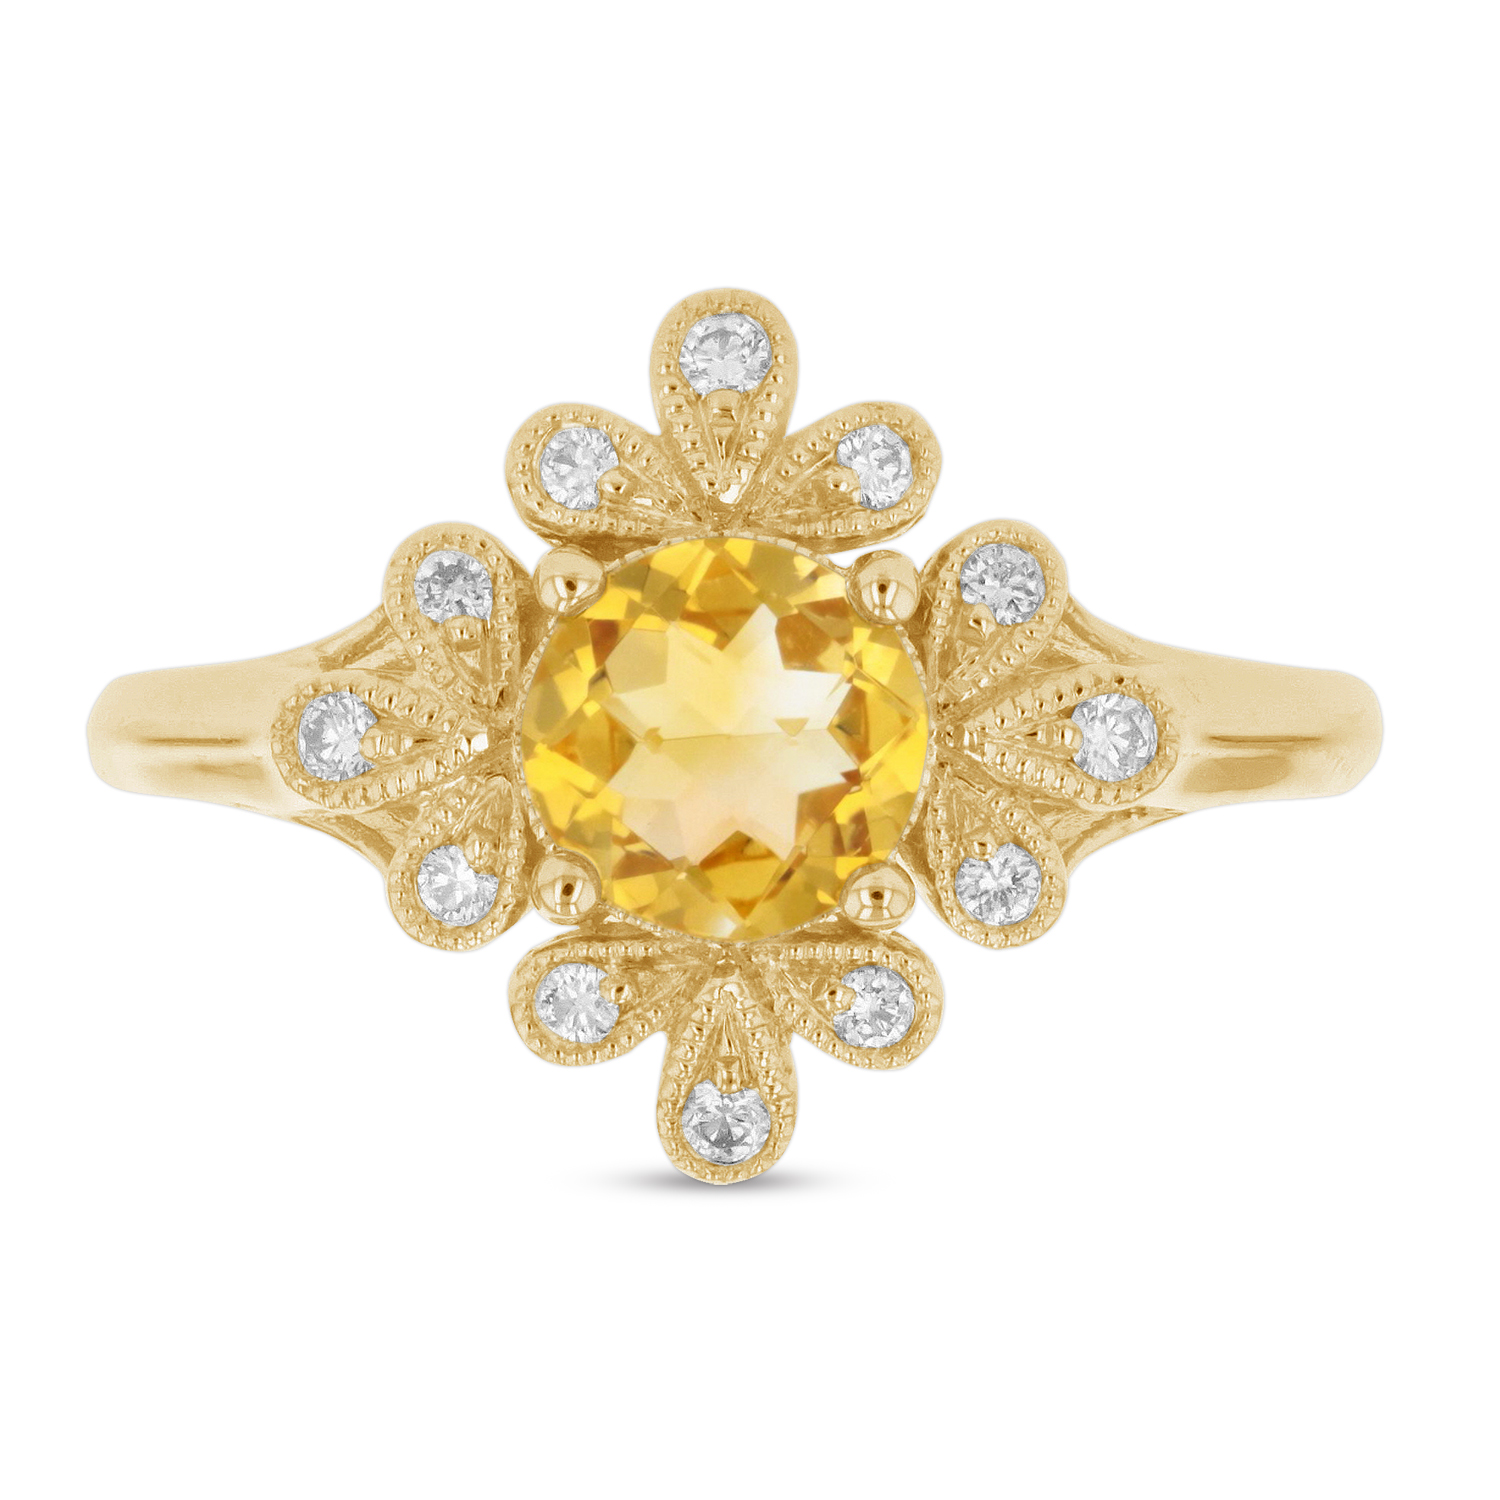 View 0.84ctw Diamond and Citrin Ring in 14k Yellow Gold